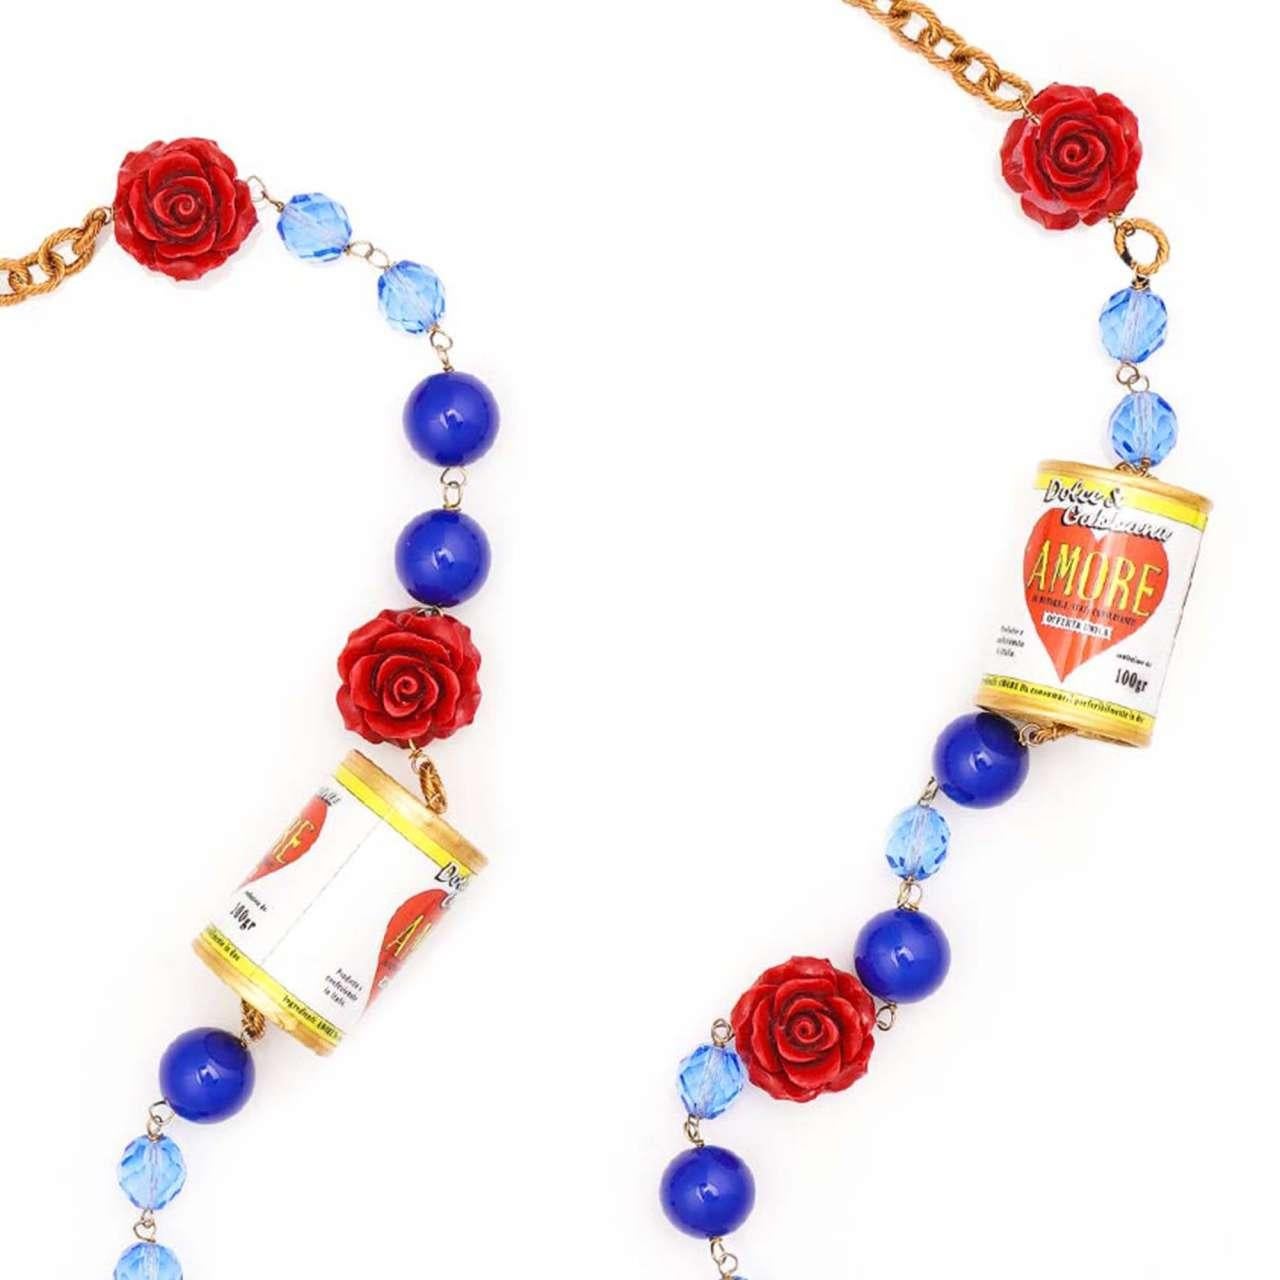 - Amore Heart Can Chain necklace with roses and crystals in gold, blue and red by DOLCE & GABBANA - RUNWAY - Dolce & Gabbana Fashion Show - New with Box - Made in Italy - Nickel free - Model: WNK6M4-W1111-Z0000 - Material:  50% Resin, 30% Messing,